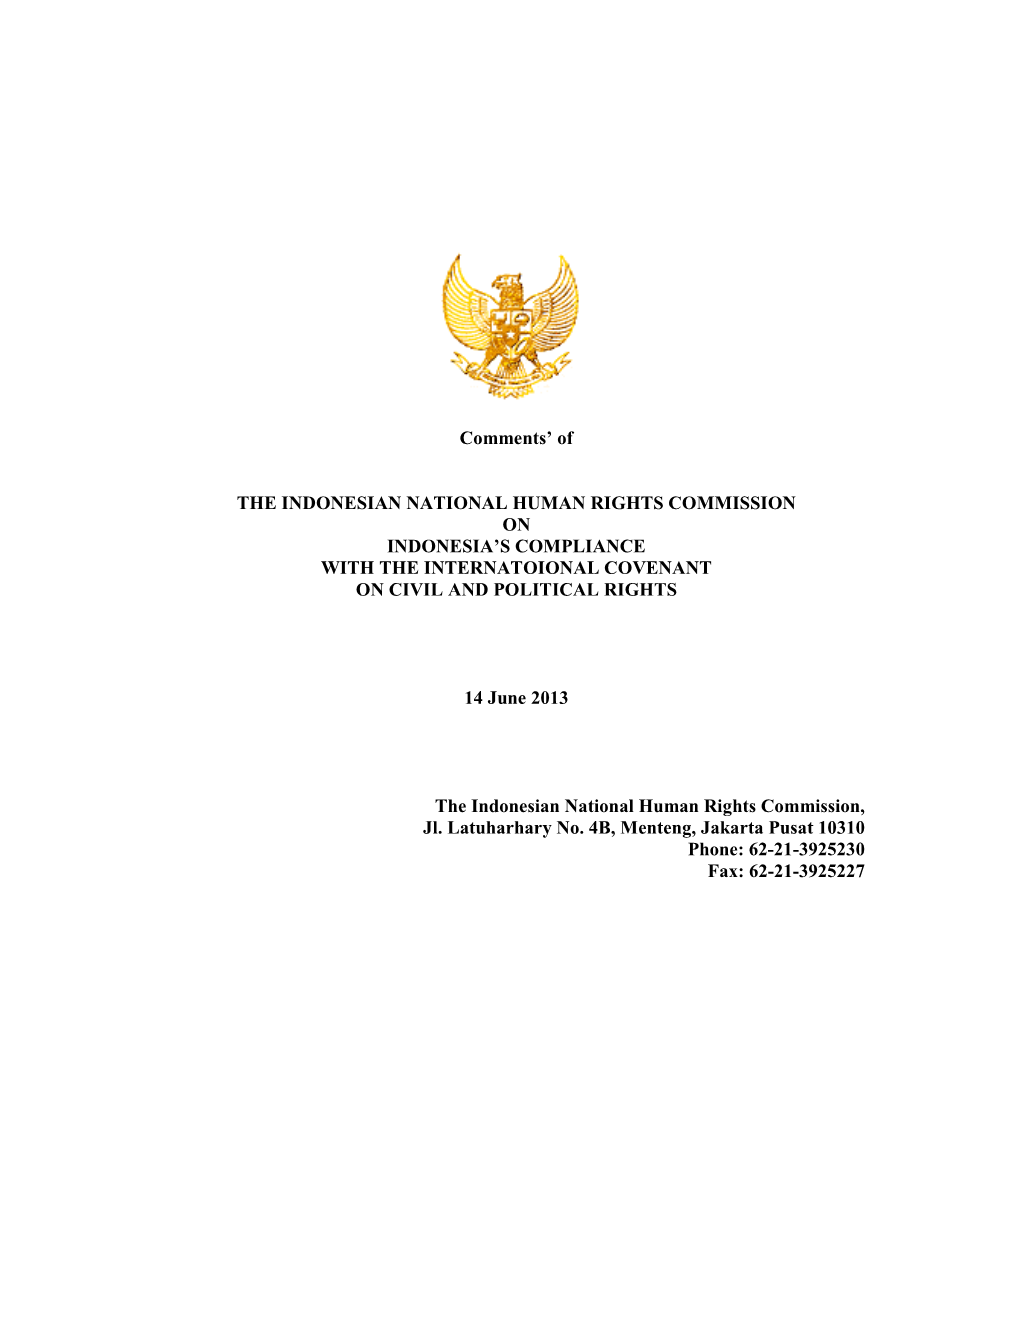 Comments' of the INDONESIAN NATIONAL HUMAN RIGHTS